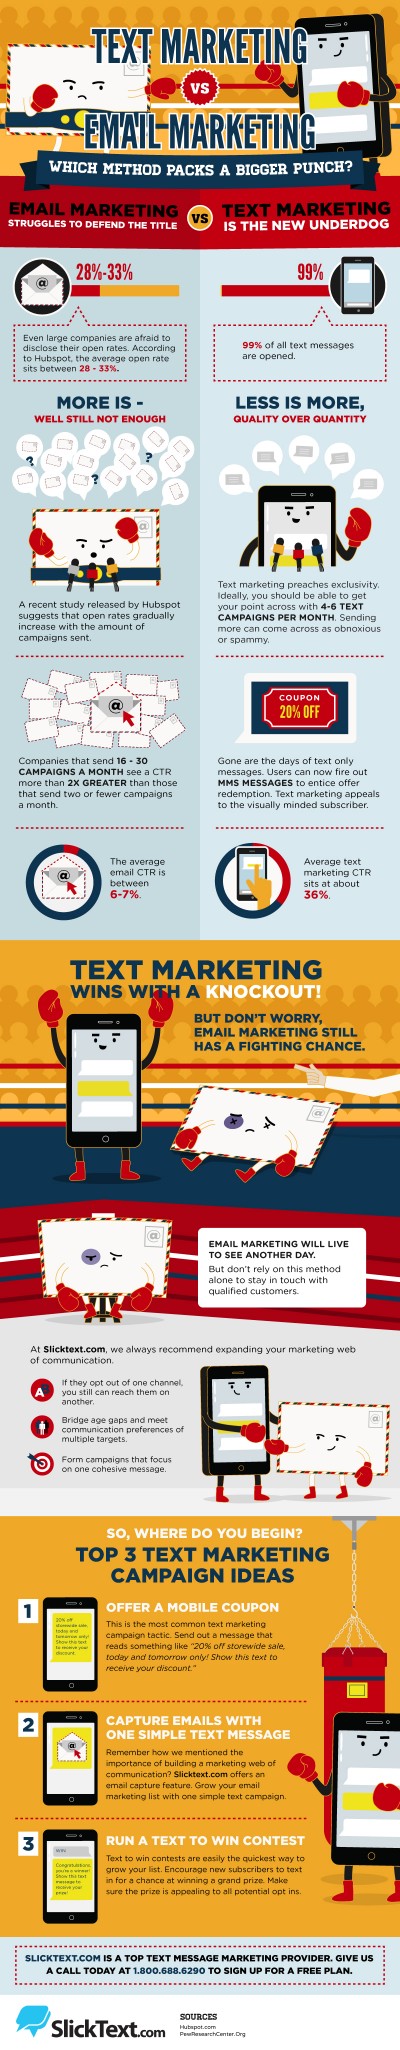 Text Marketing Vs. Email Marketing: Which One Packs a Bigger Punch ...